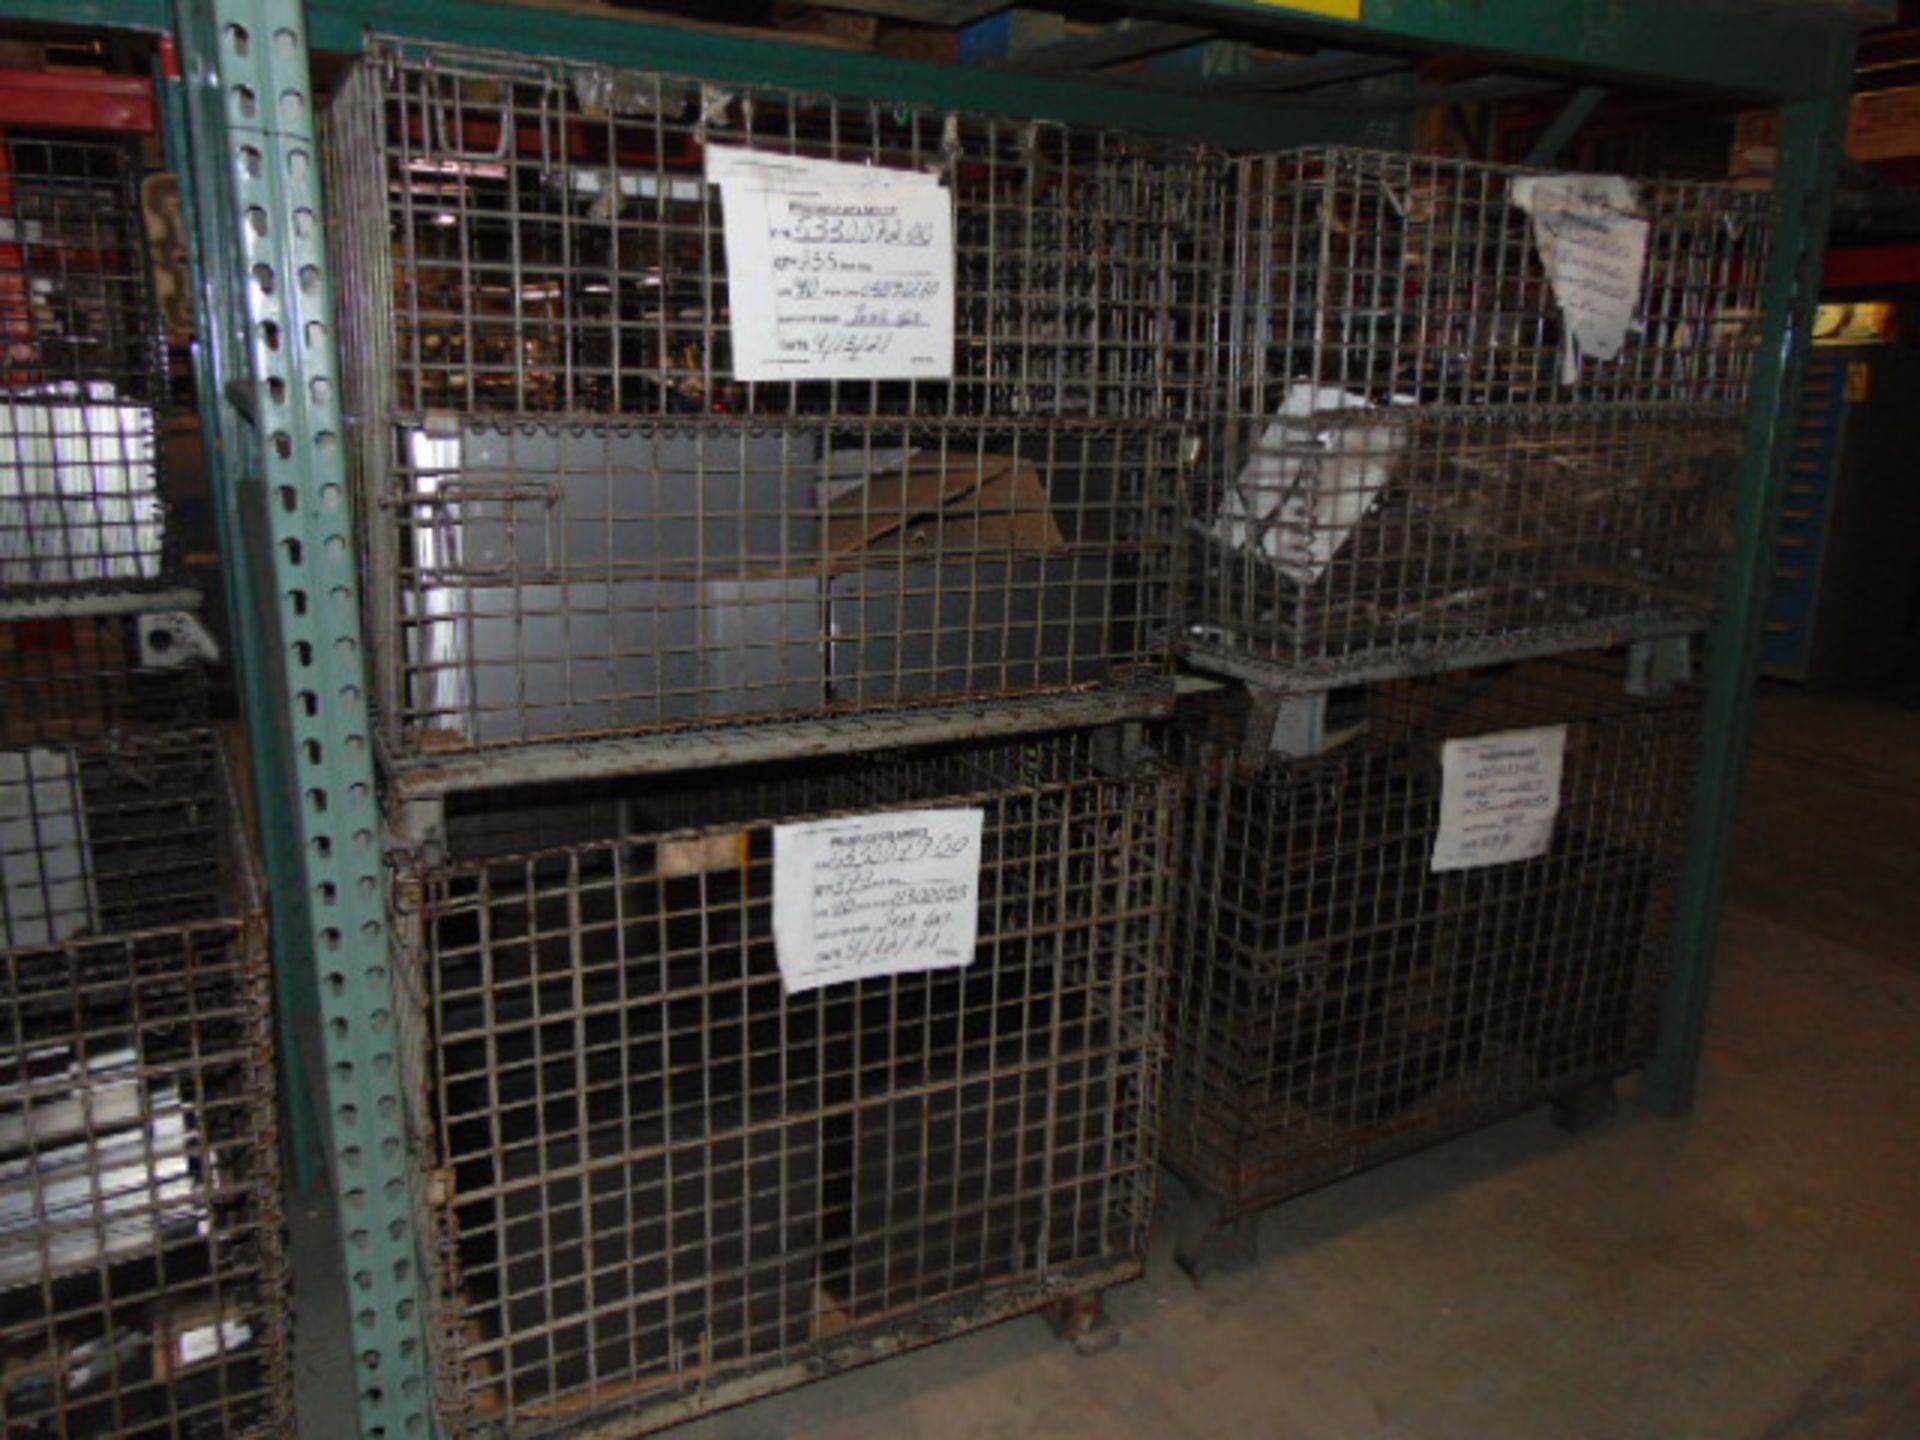 LOT CONSISTING OF: assorted steel in process parts, wire baskets & cardboard (no dies or racks) ( - Image 38 of 39